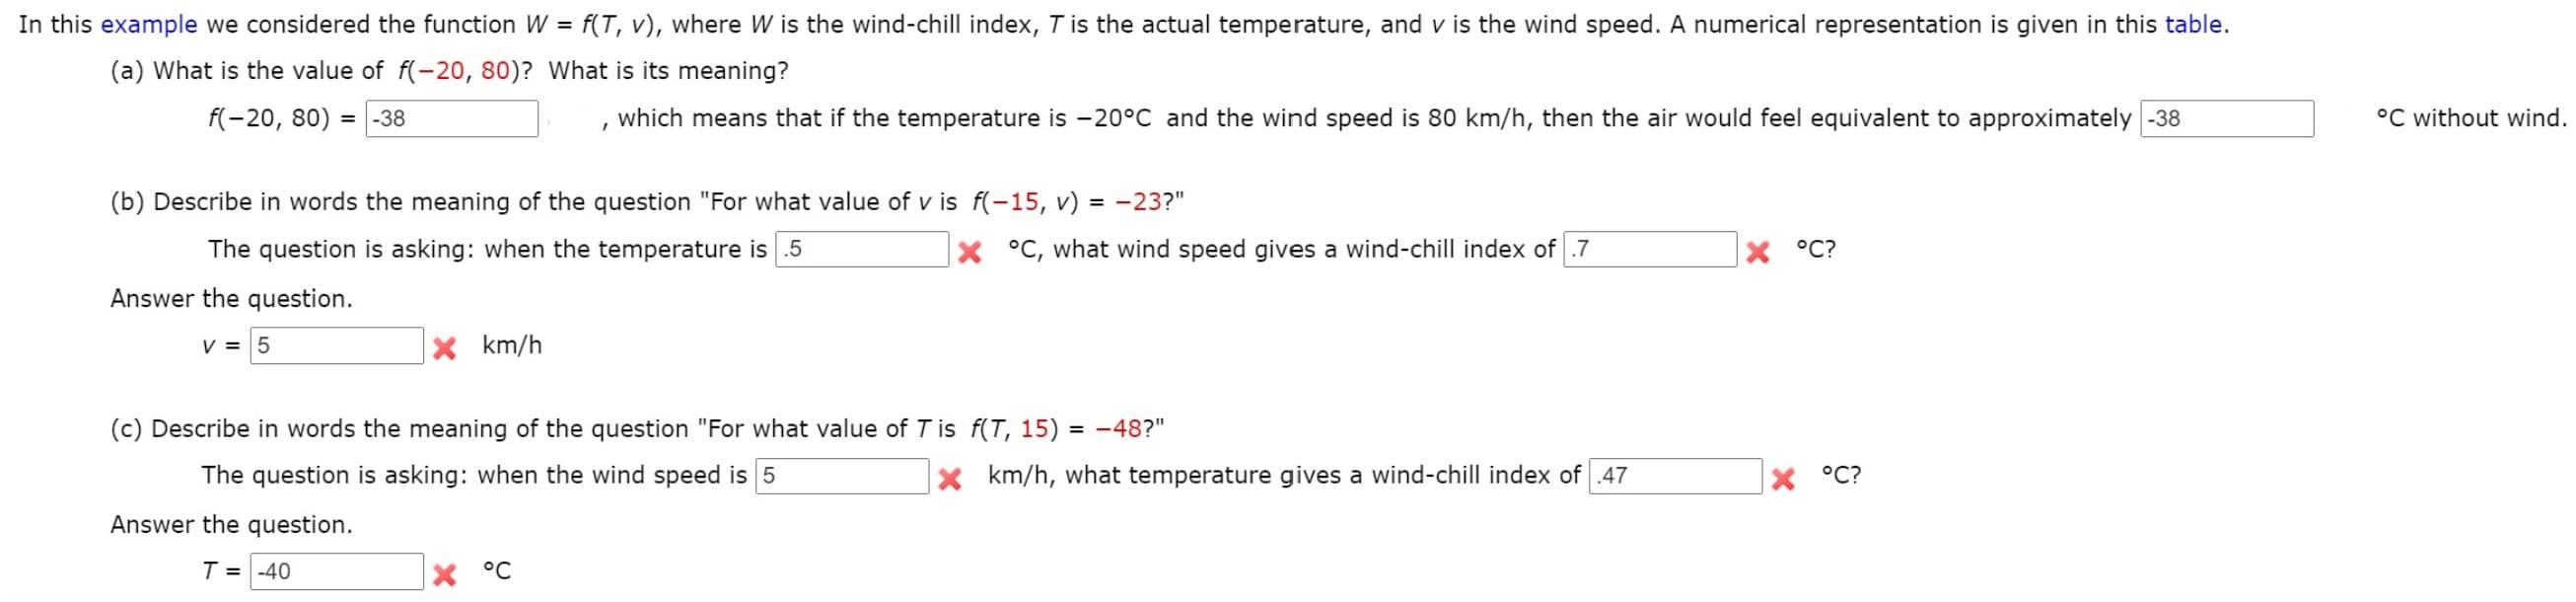 In this example we considered the function W = f(T, v), where W is the wind-chill index, T is the actual temperature, and v is the wind speed. A numerical representation is given in this table.
%3D
(a) What is the value of f(-20, 80)? What is its meaning?
f(-20, 80) = -38
which means that if the temperature is -20°C and the wind speed is 80 km/h, then the air would feel equivalent to approximately -38
°C without wind.
%3D
(b) Describe in words the meaning of the question "For what value of v is f(-15, v) = -23?"
The question is asking: when the temperature is .5
X °C, what wind speed gives a wind-chill index of .7
X °C?
Answer the question.
V = 5
X km/h
(c) Describe in words the meaning of the question "For what value of T is f(T, 15) = -48?"
The question is asking: when the wind speed is 5
x km/h, what temperature gives a wind-chill index of .47
X °C?
Answer the question.
T = -40
X °C
